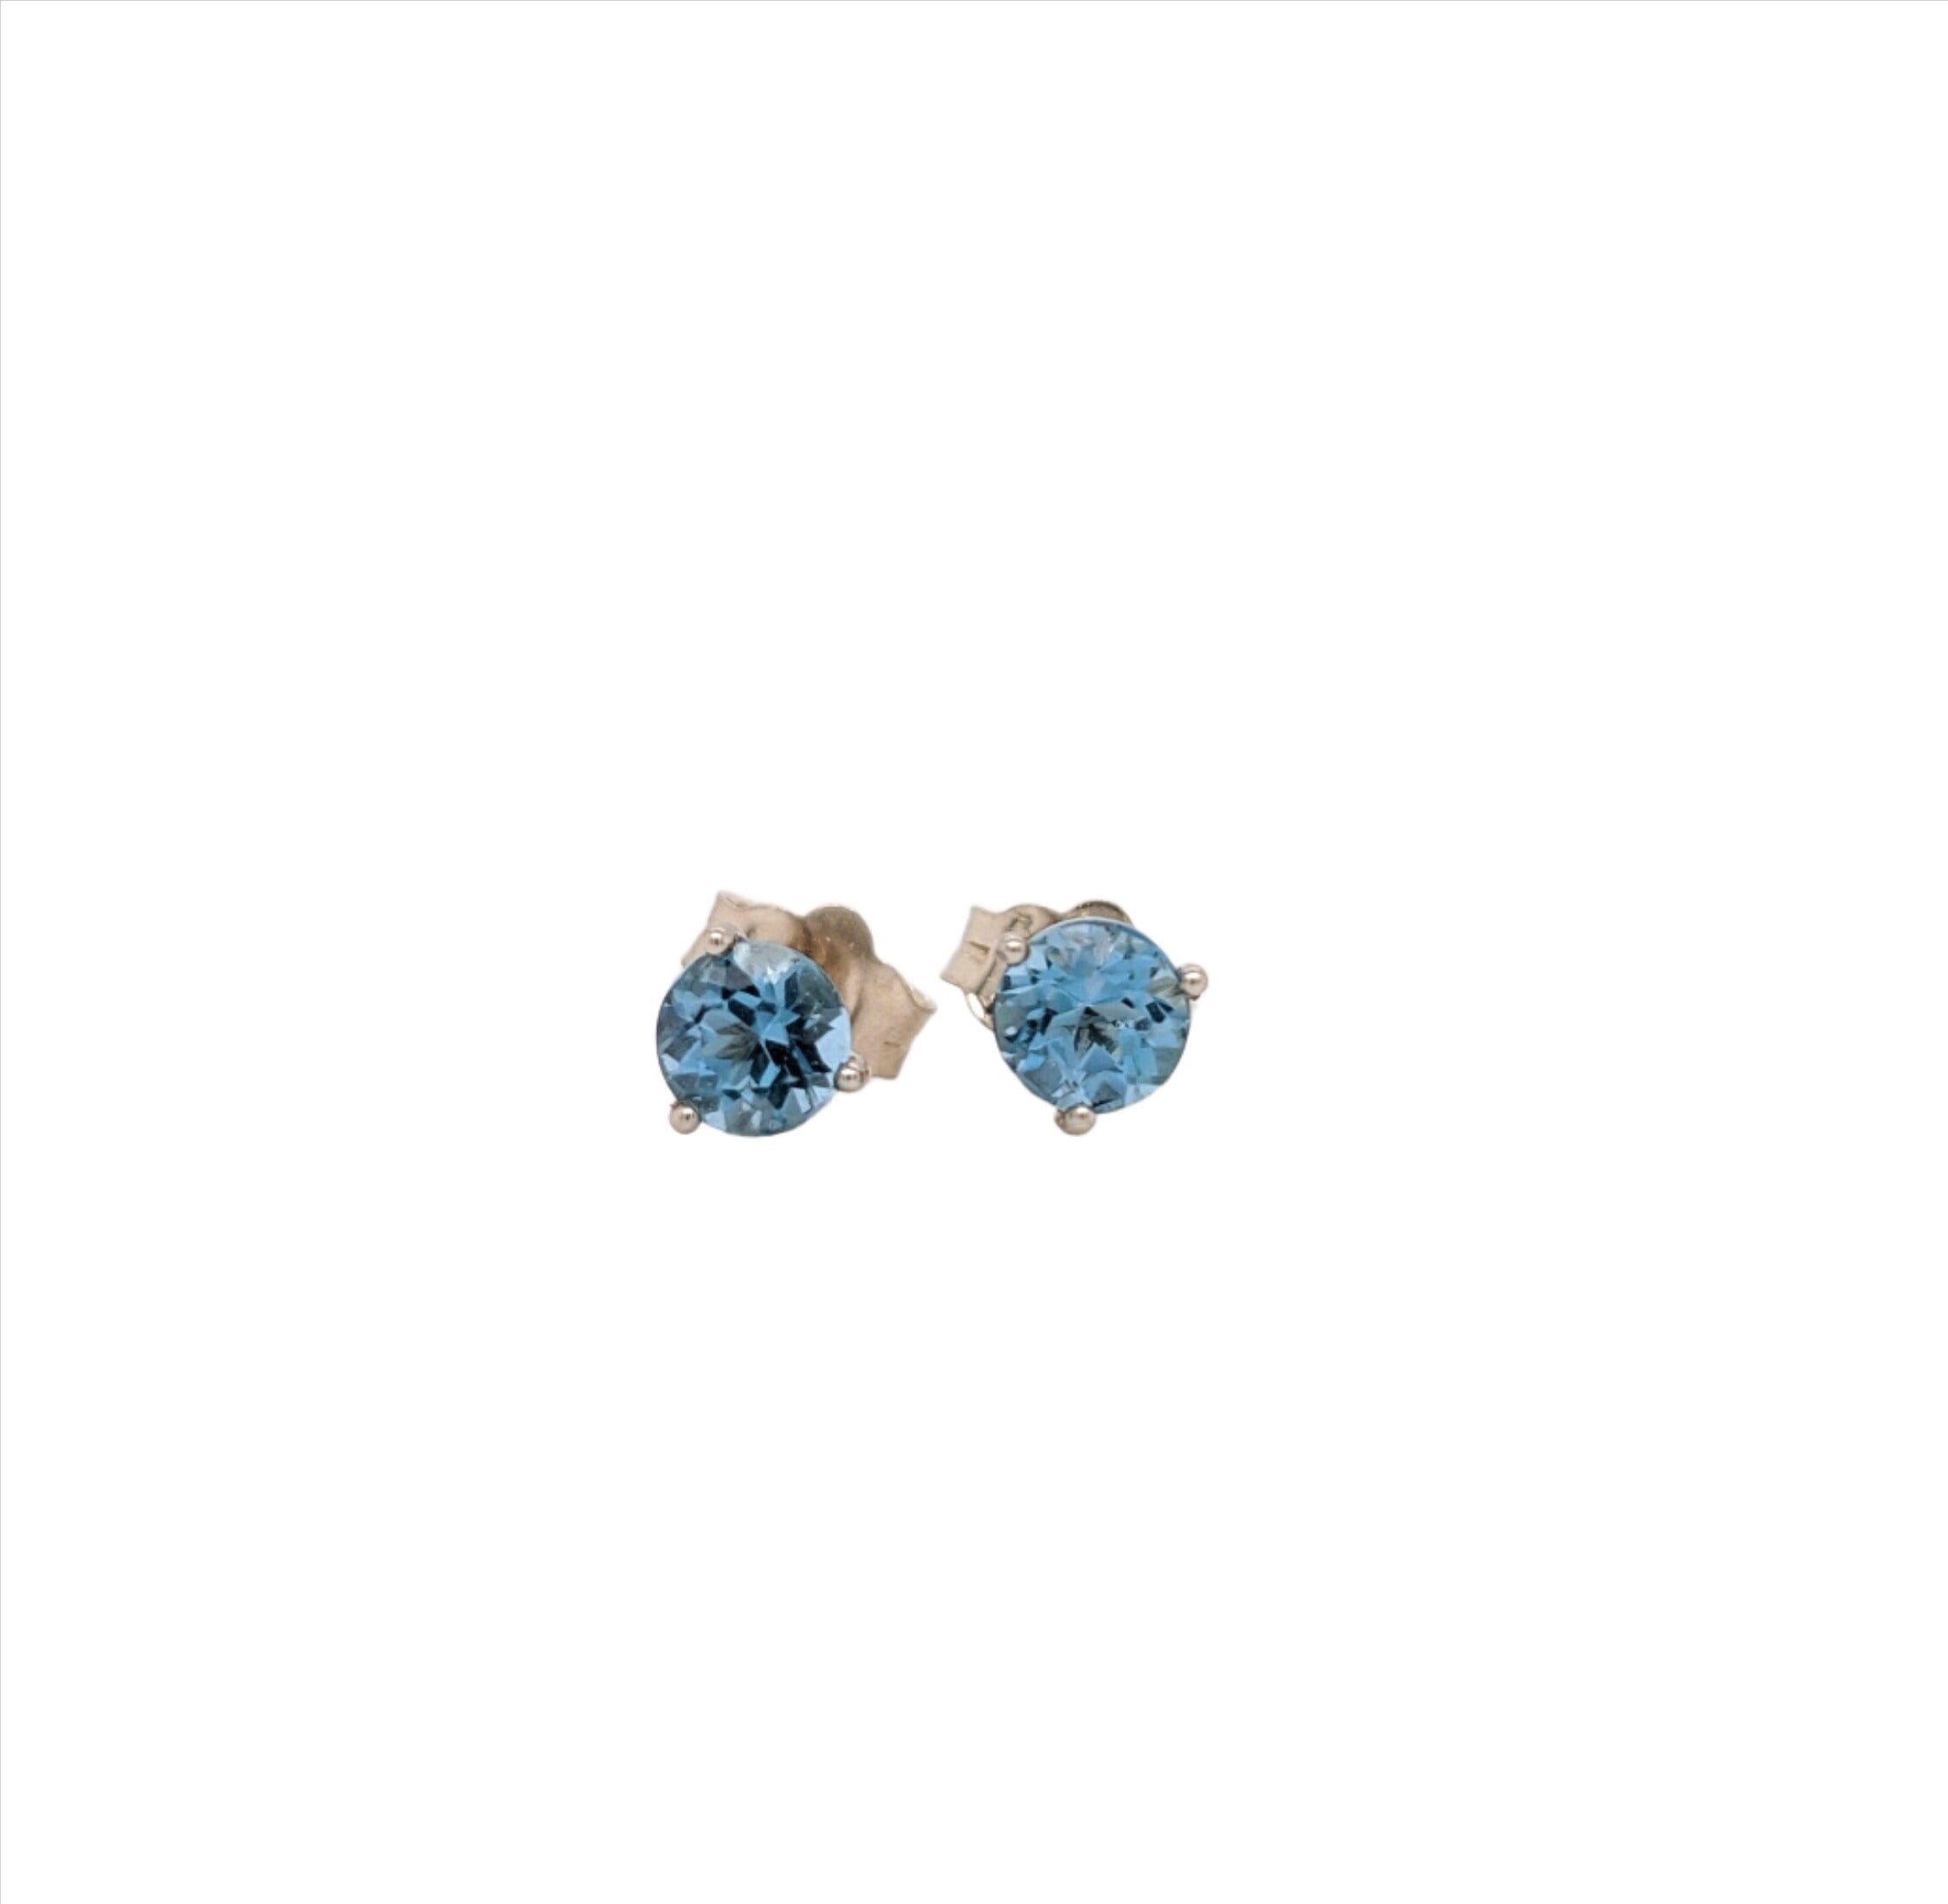 Stunning Aquamarine Studs in 14k Solid Gold w Martini Setting | Round 4mm 5mm 6mm | Solitaire Earrings | March Birthstone I Push Backing